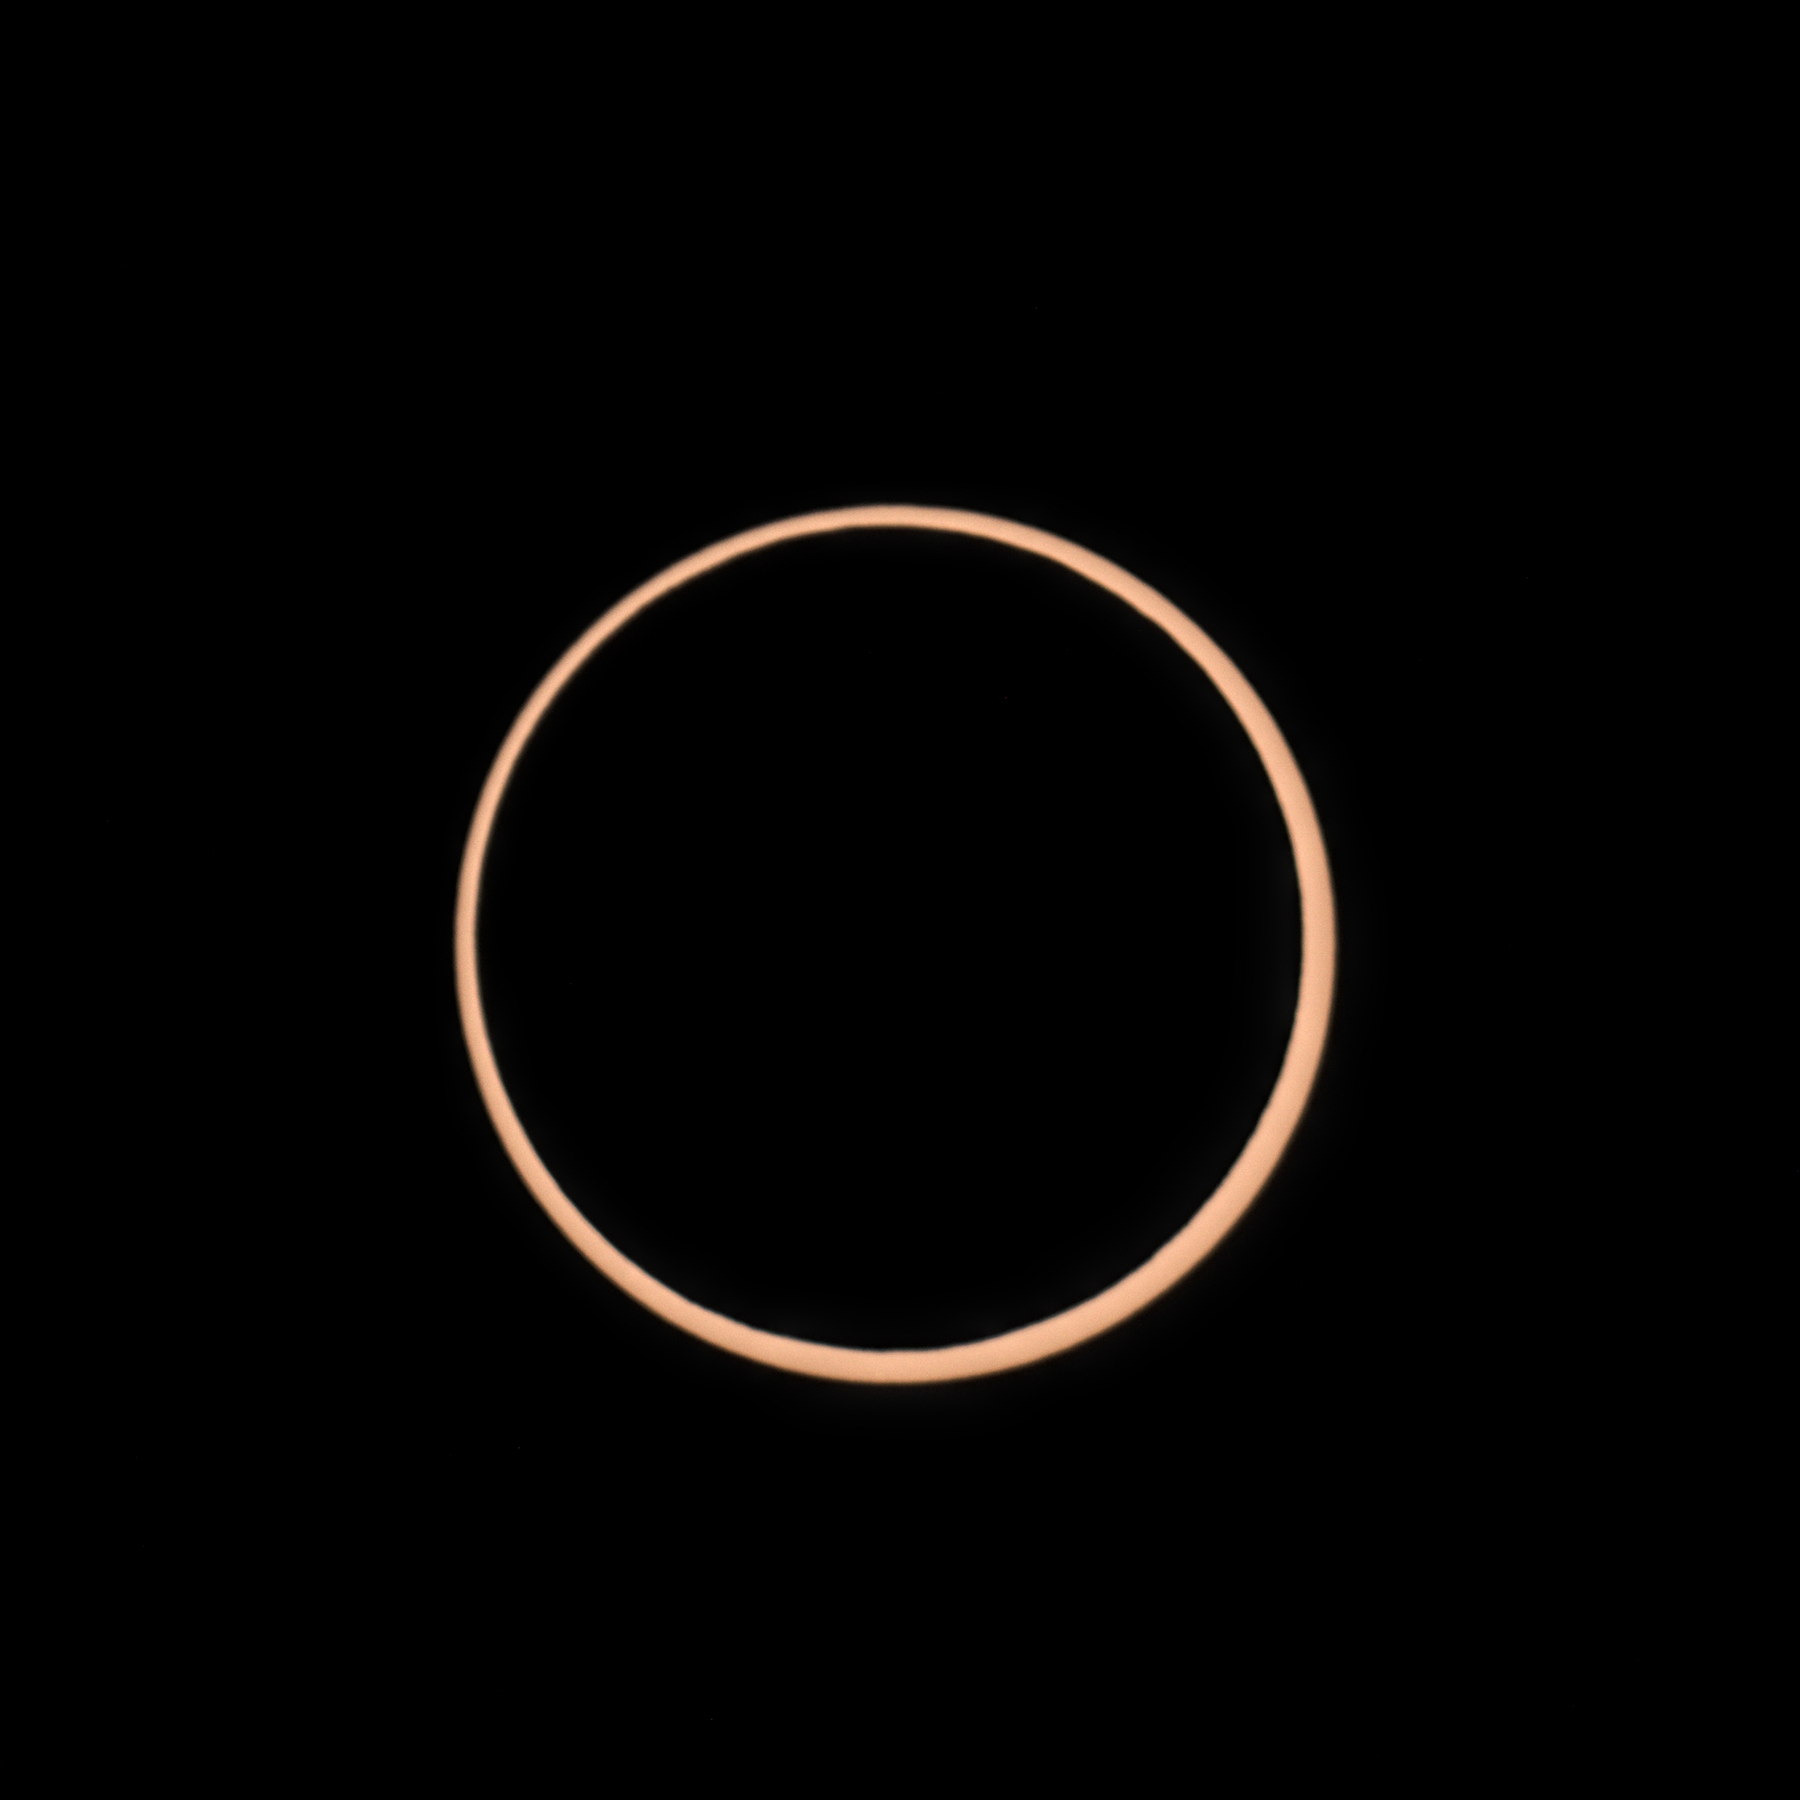 The sun is eclipsed entirely by the moon, except for a perfect thin ring around the outside.